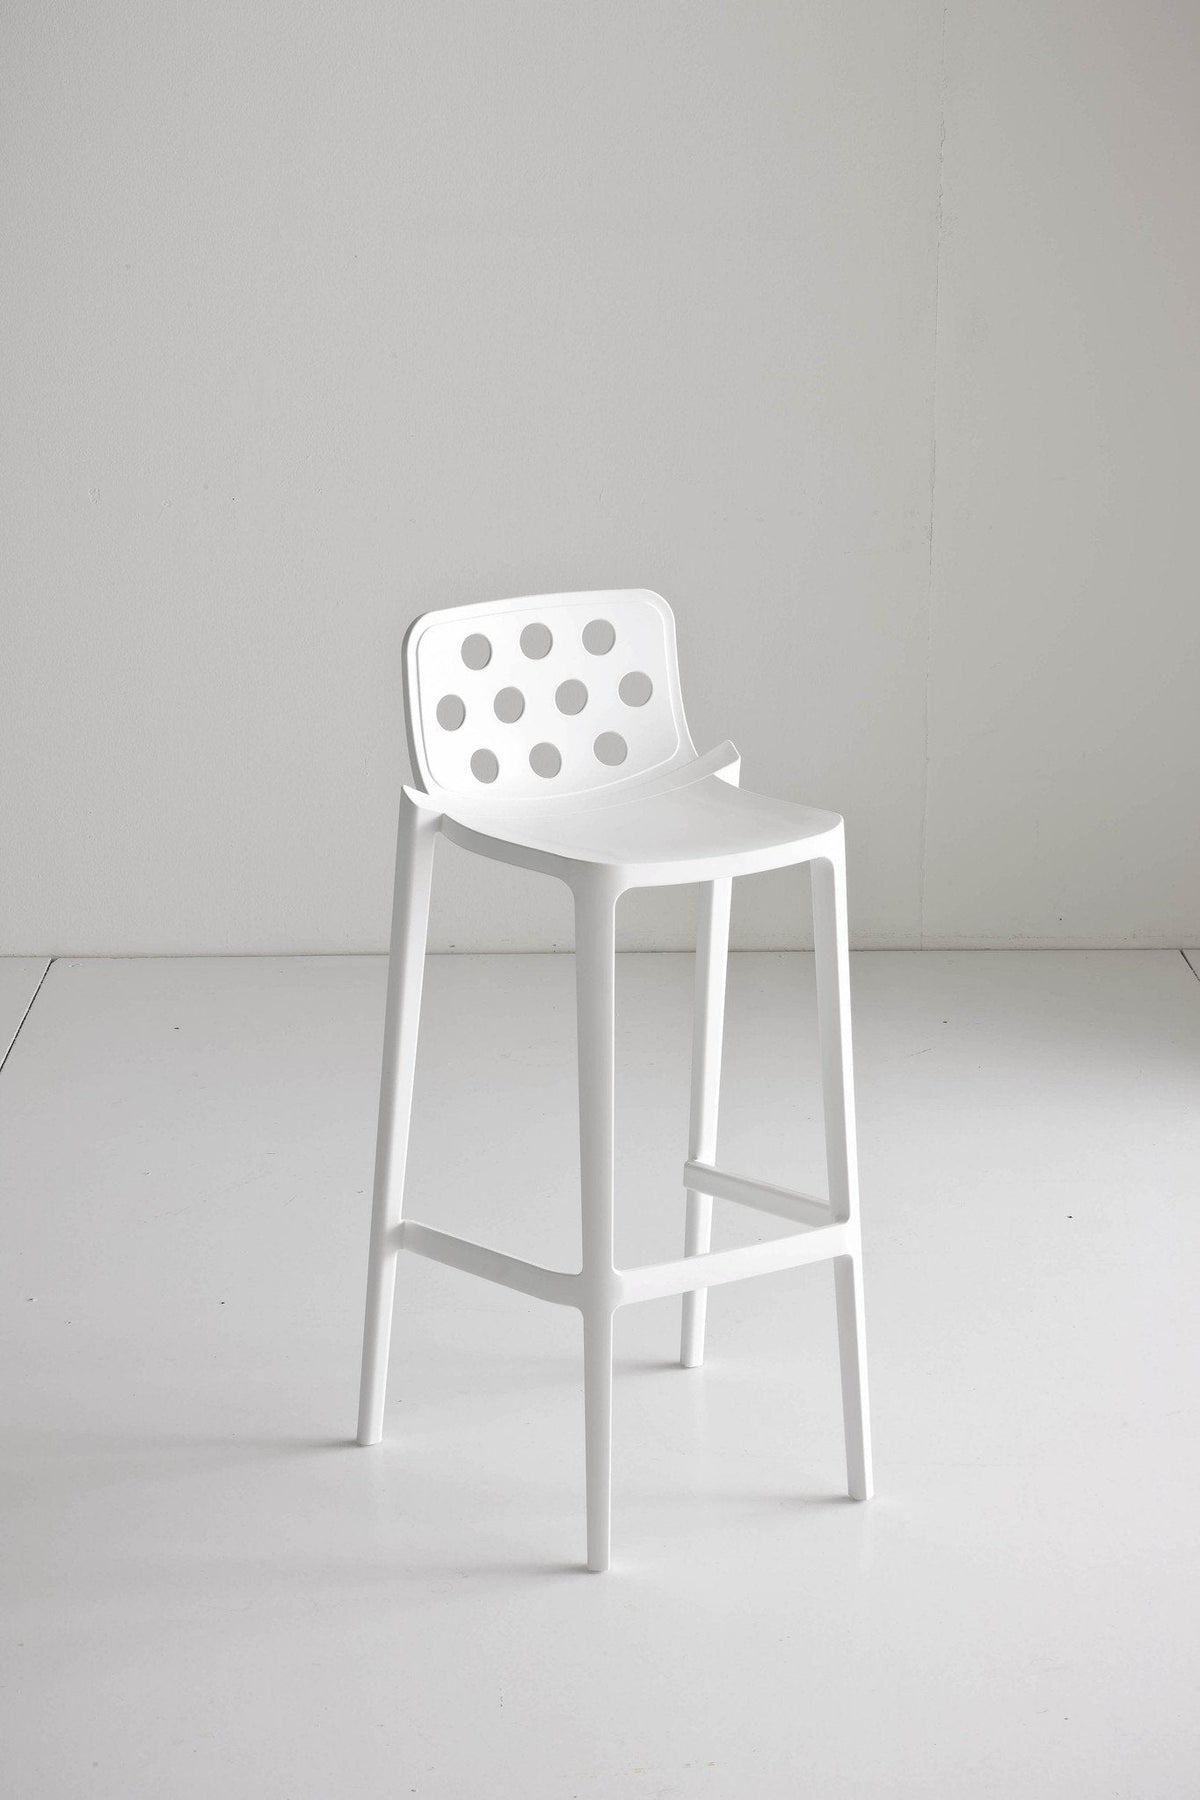 Isidoro High Stool-Gaber-Contract Furniture Store